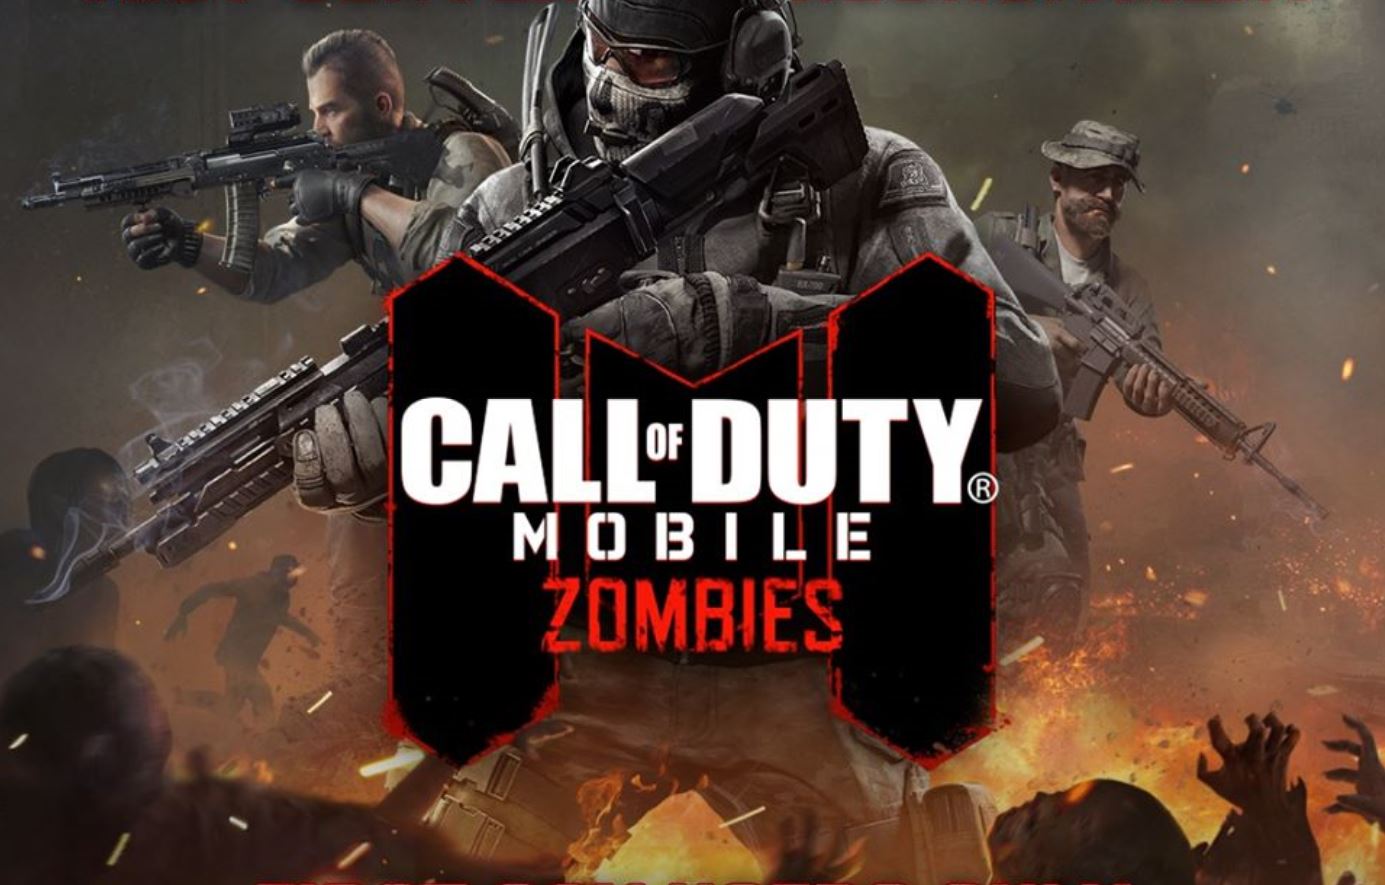 Zombie Mode In Cod Mobile Garena, Zombie Mode In Cod - Call Of Duty Mobile Zombie - HD Wallpaper 